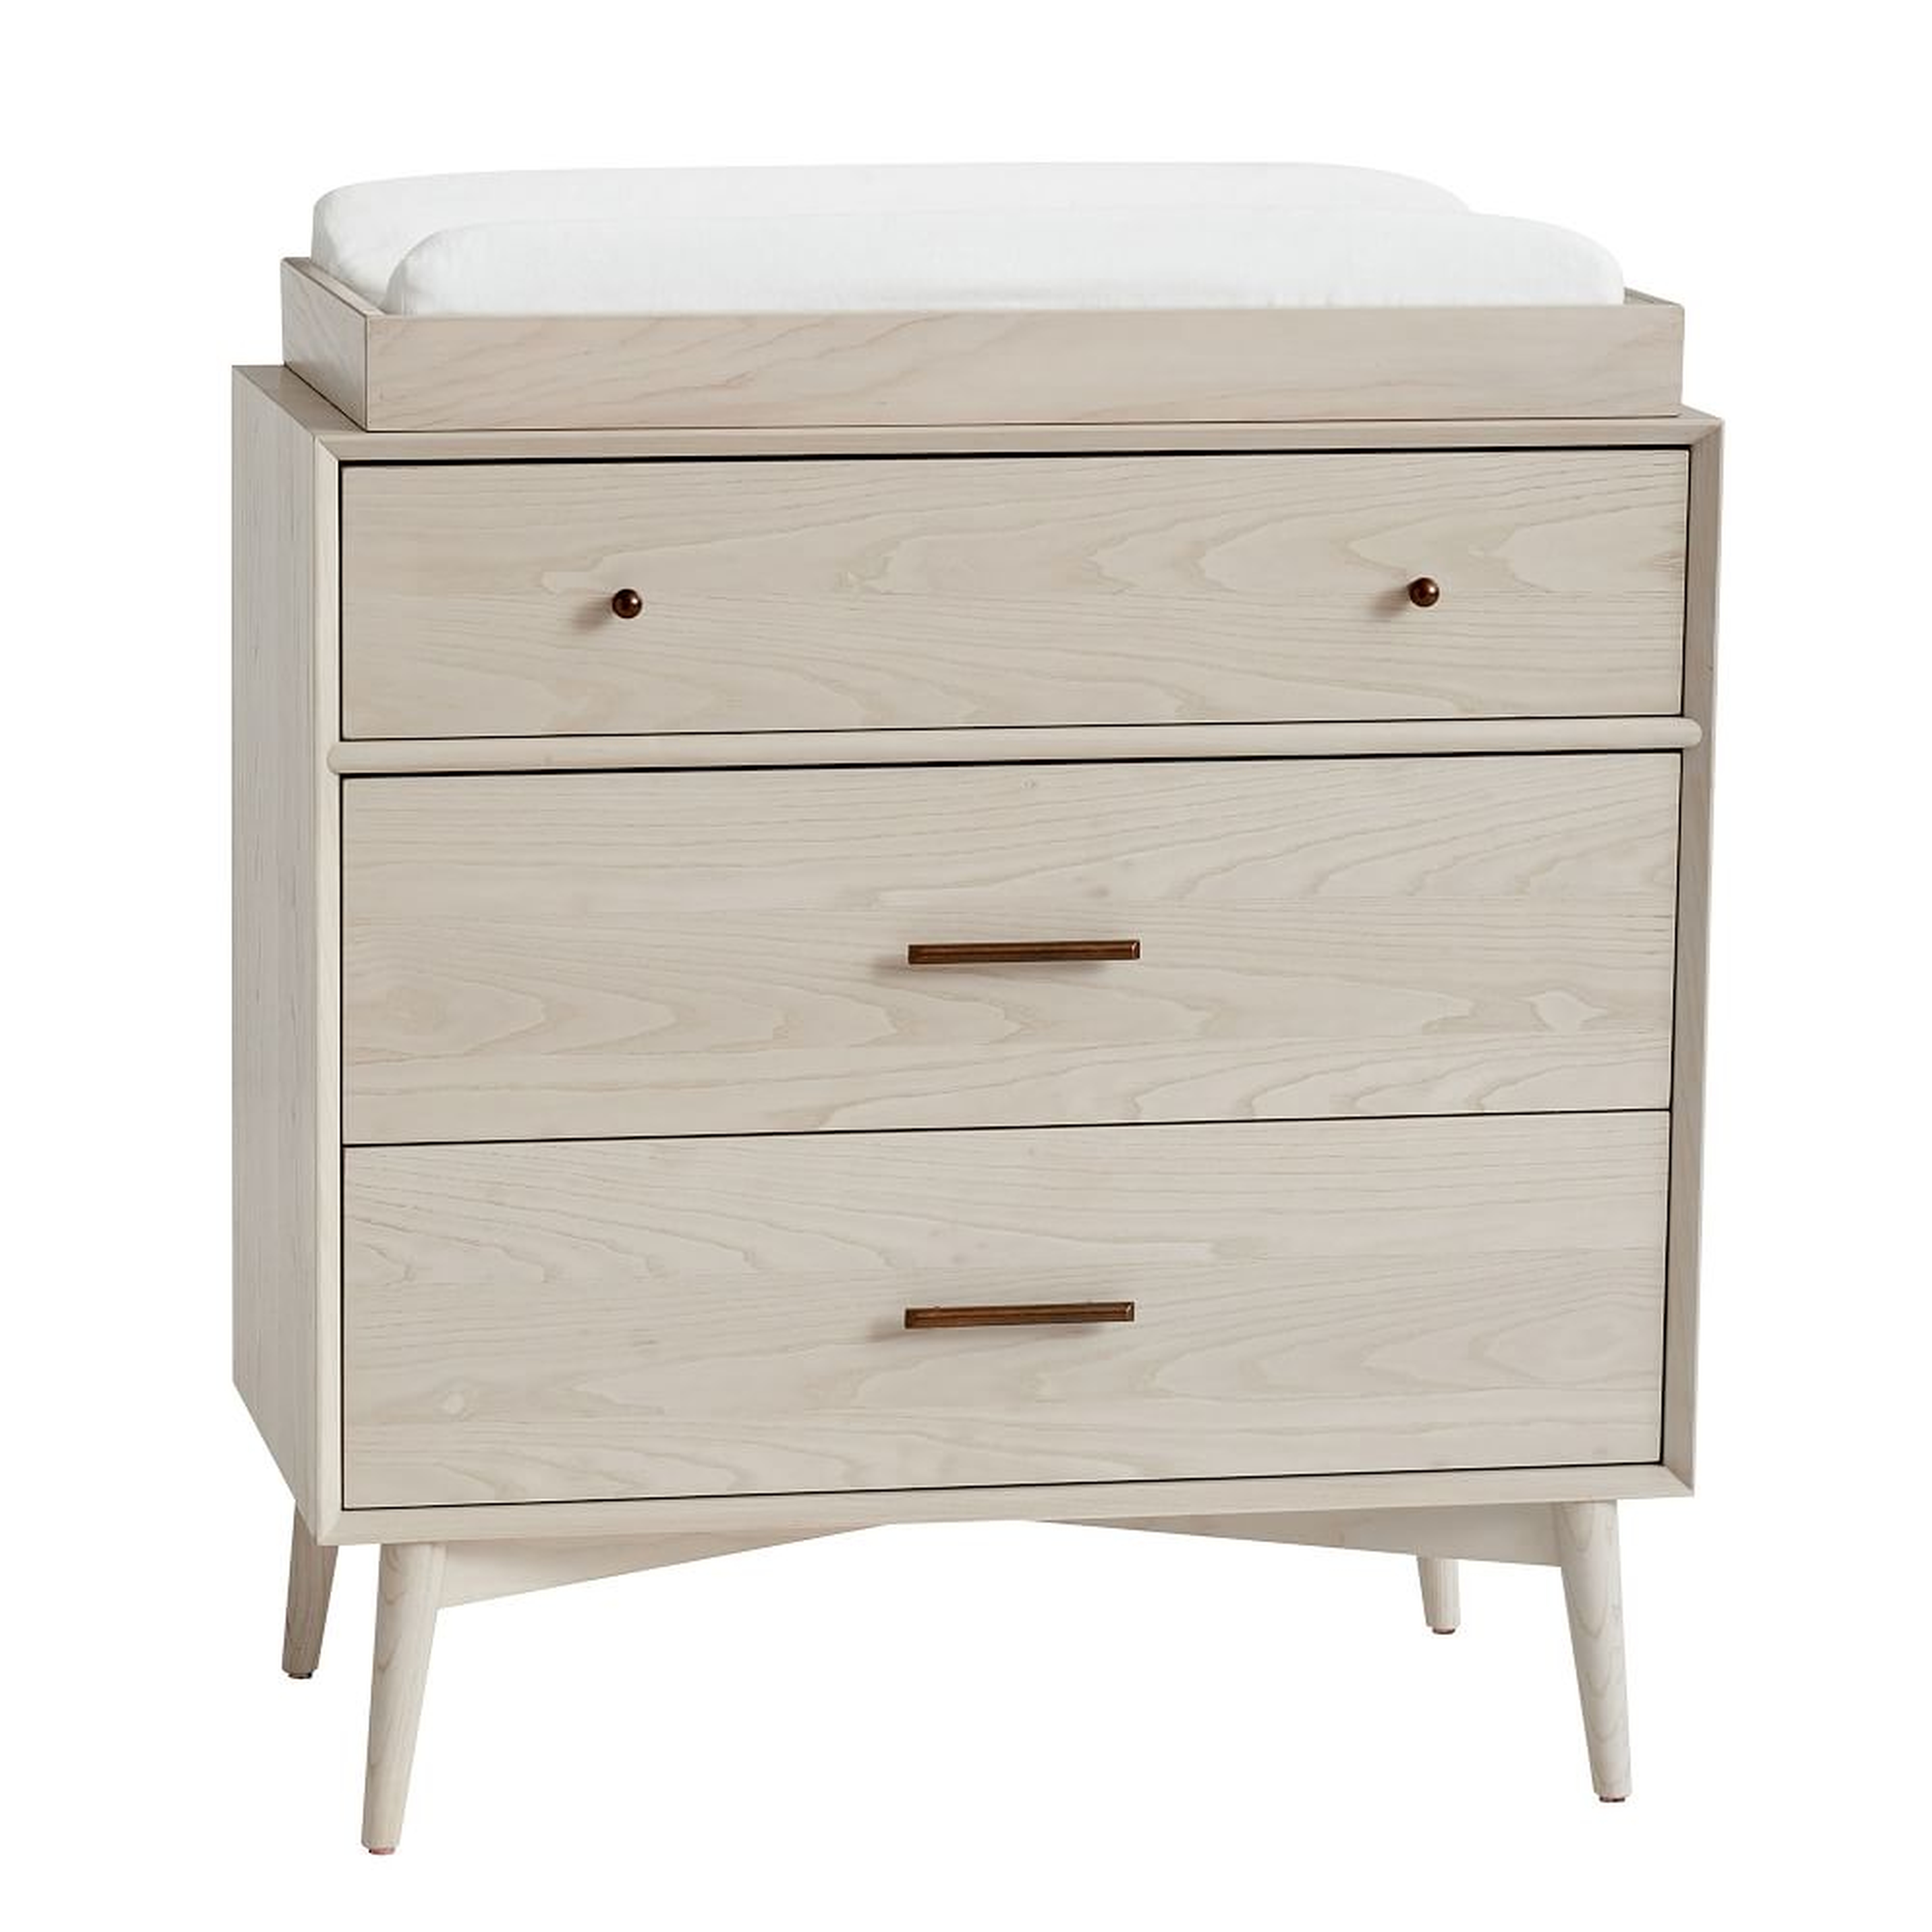 Mid-Century 3-Drawer Changing Table - Pebble, WE Kids - West Elm